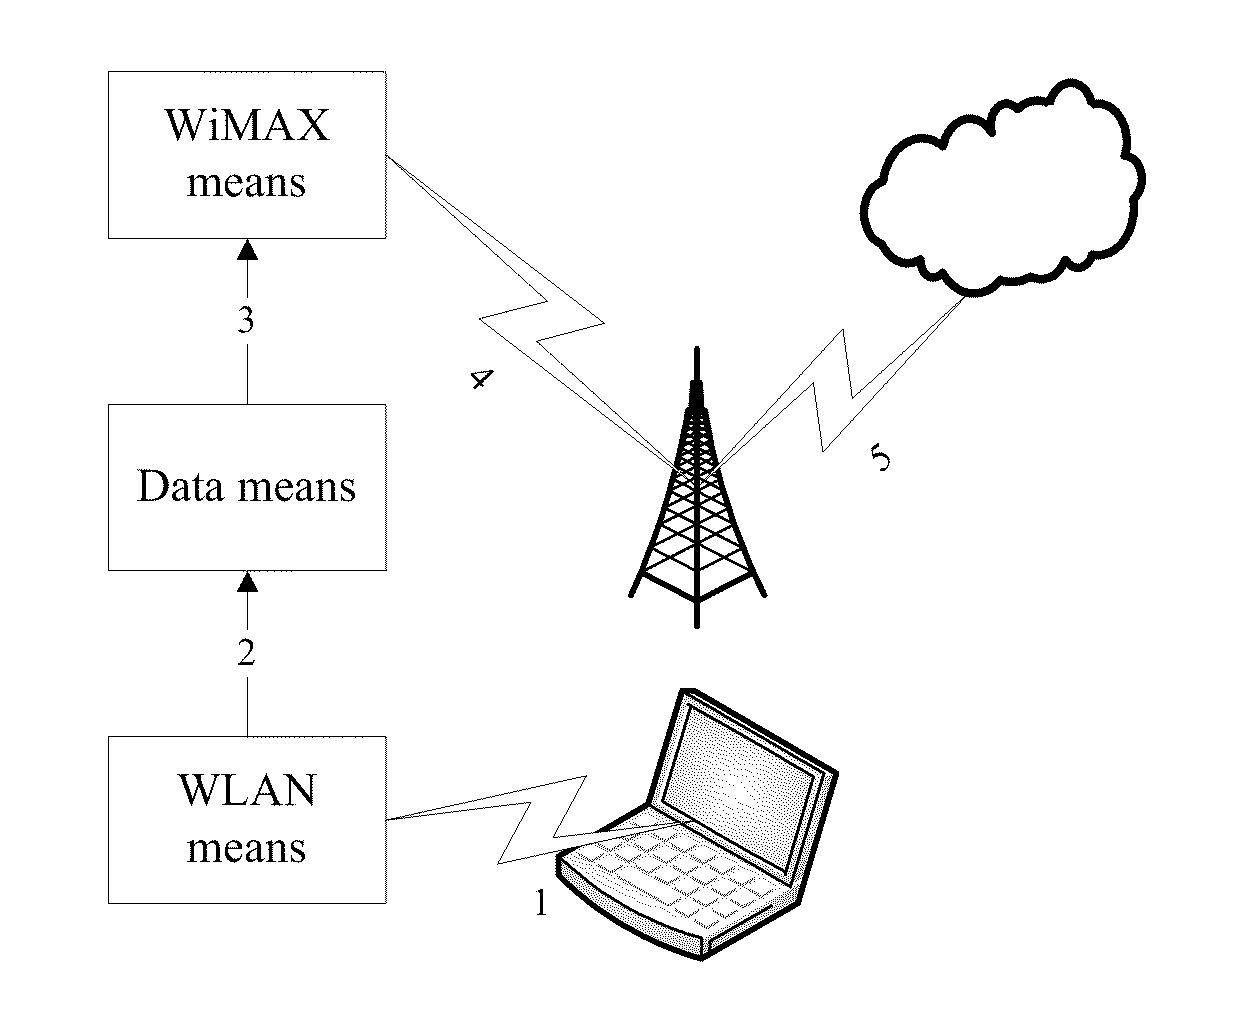 Apparatus and a method for enabling a WLAN device to access a wimax network